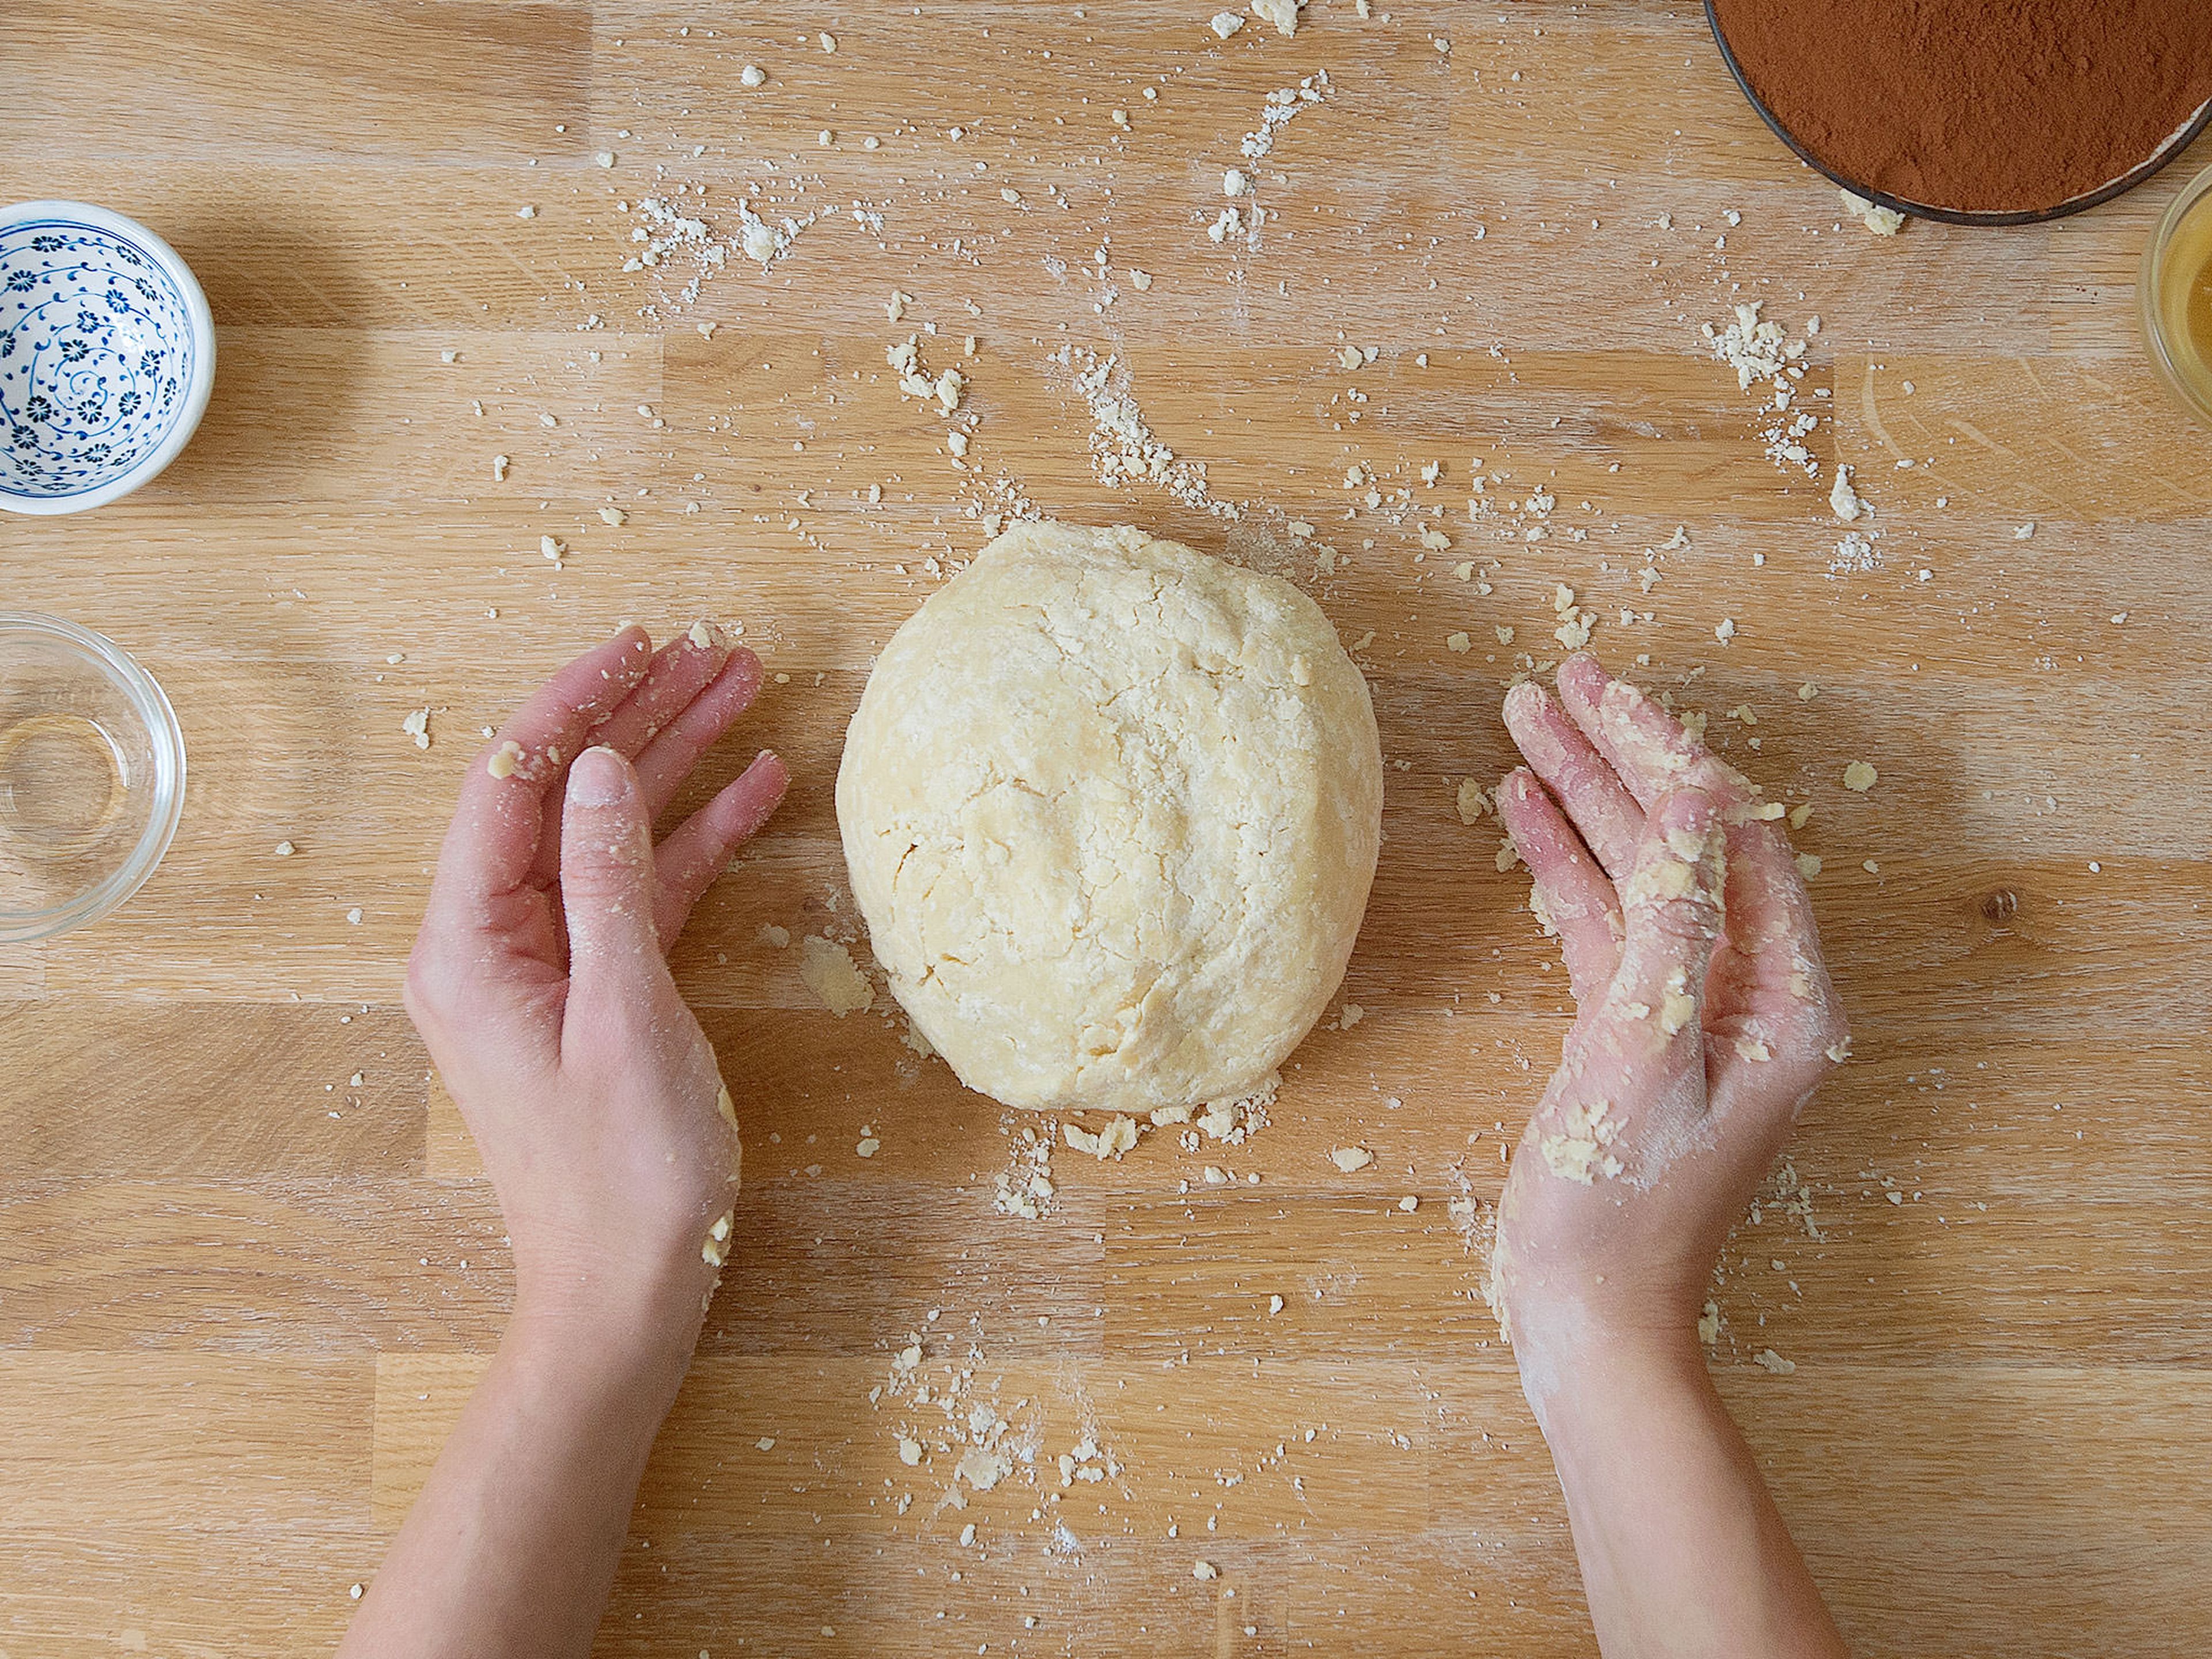 In a large bowl, combine spelt flour, some of the margarine, some of the rice syrup, vodka, and salt until dough is smooth and uniform in consistency. Wrap dough in plastic wrap and transfer to refrigerator. Allow to set for approx. 30 min.